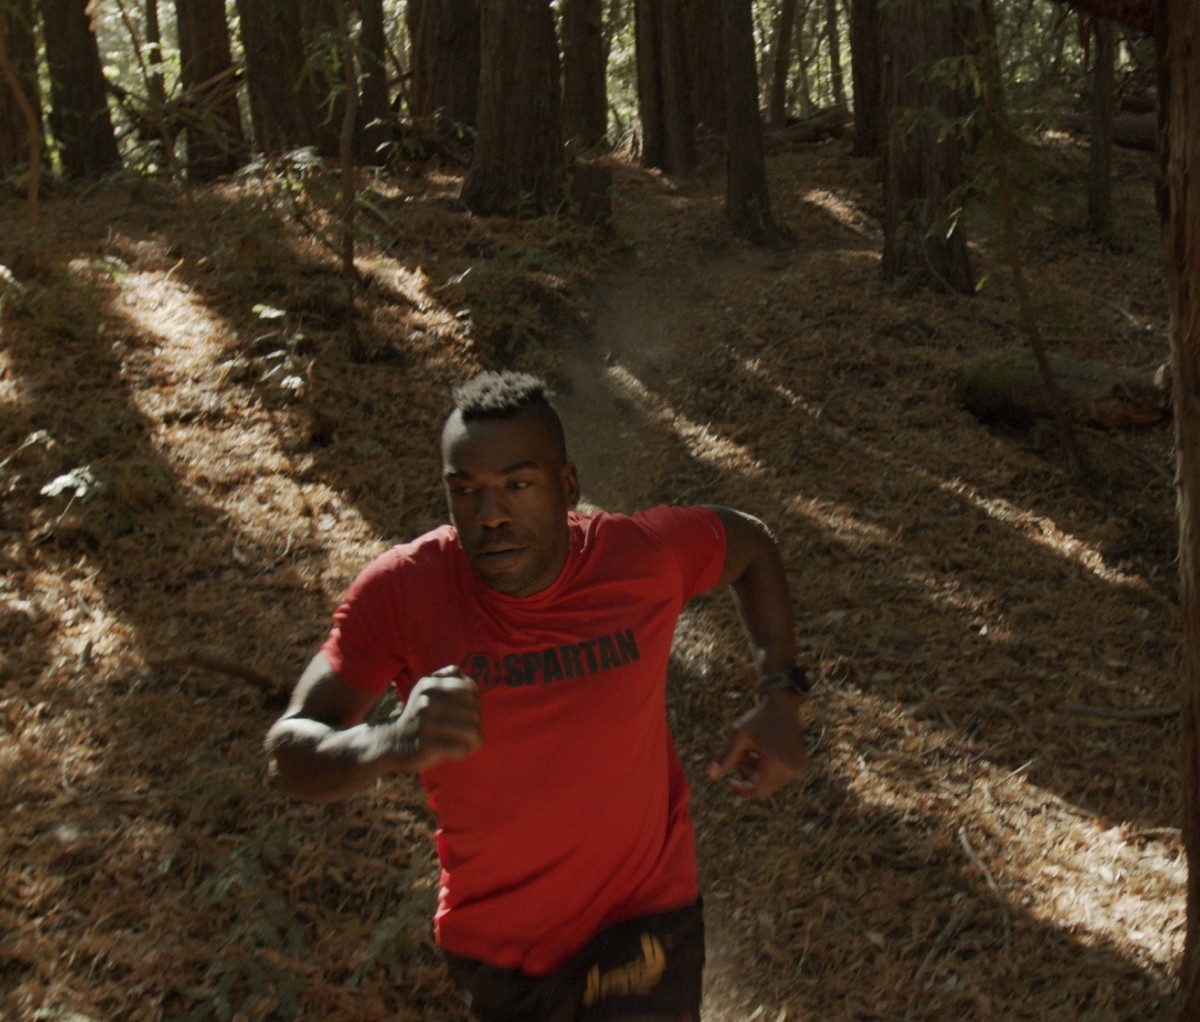 Triathlete Max Fennell running through a wooded area in California